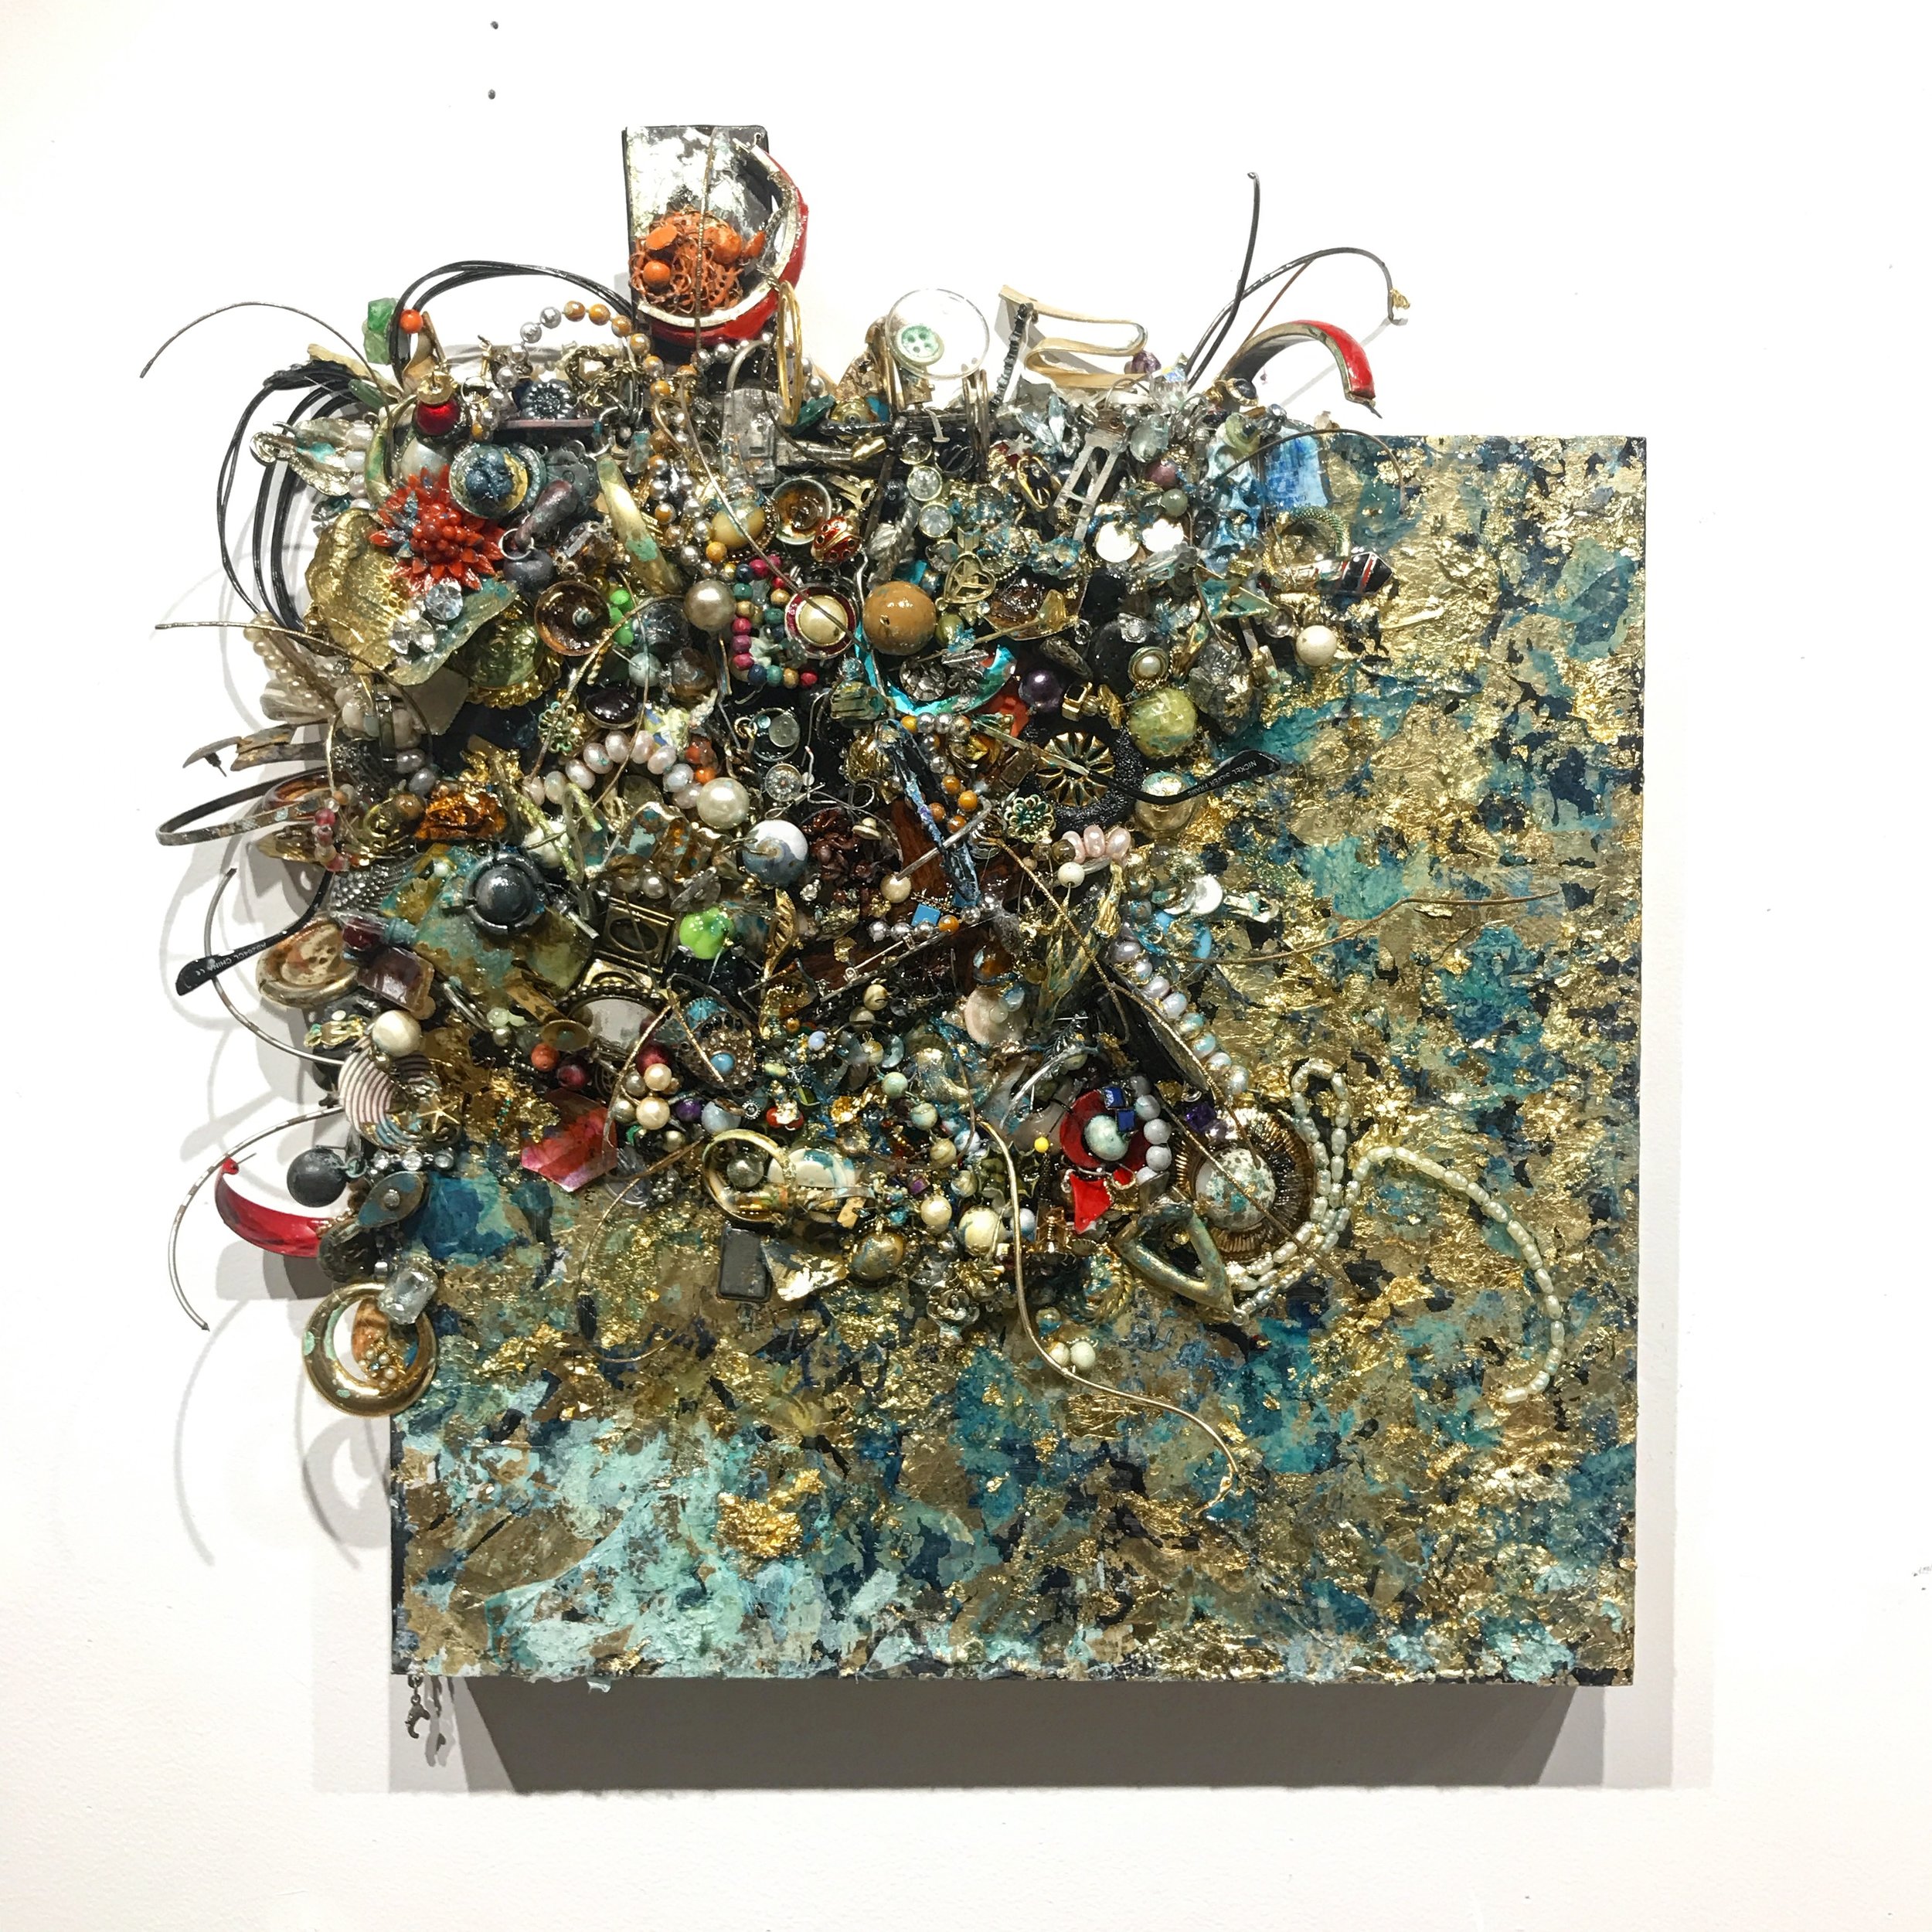   Embroachment  1, 2019, costume jewelry, found objects, plaster, gold leaf and resin on panel, 15x15” 